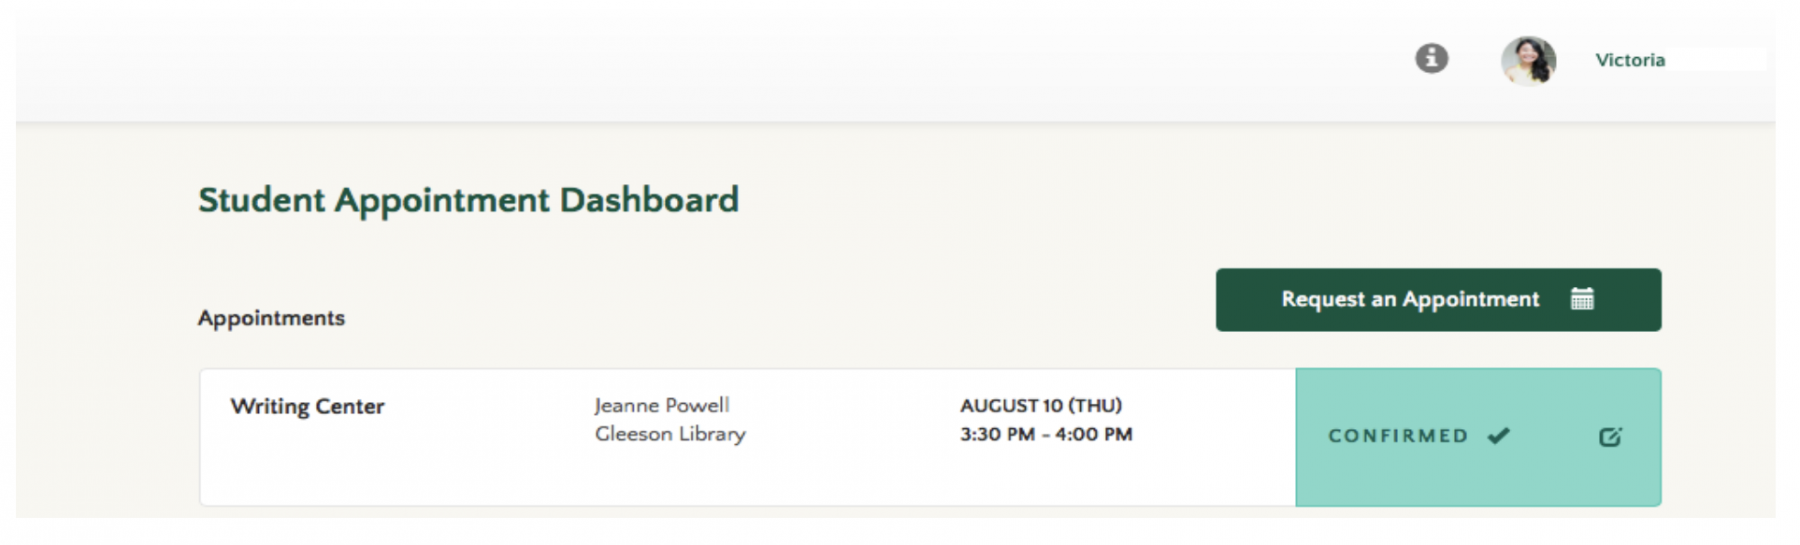 STEP 3 - You	have	reached	the	“Student	Appointment	Dashboard”.	 You	will	see	all	of	your	scheduled	appointments.	